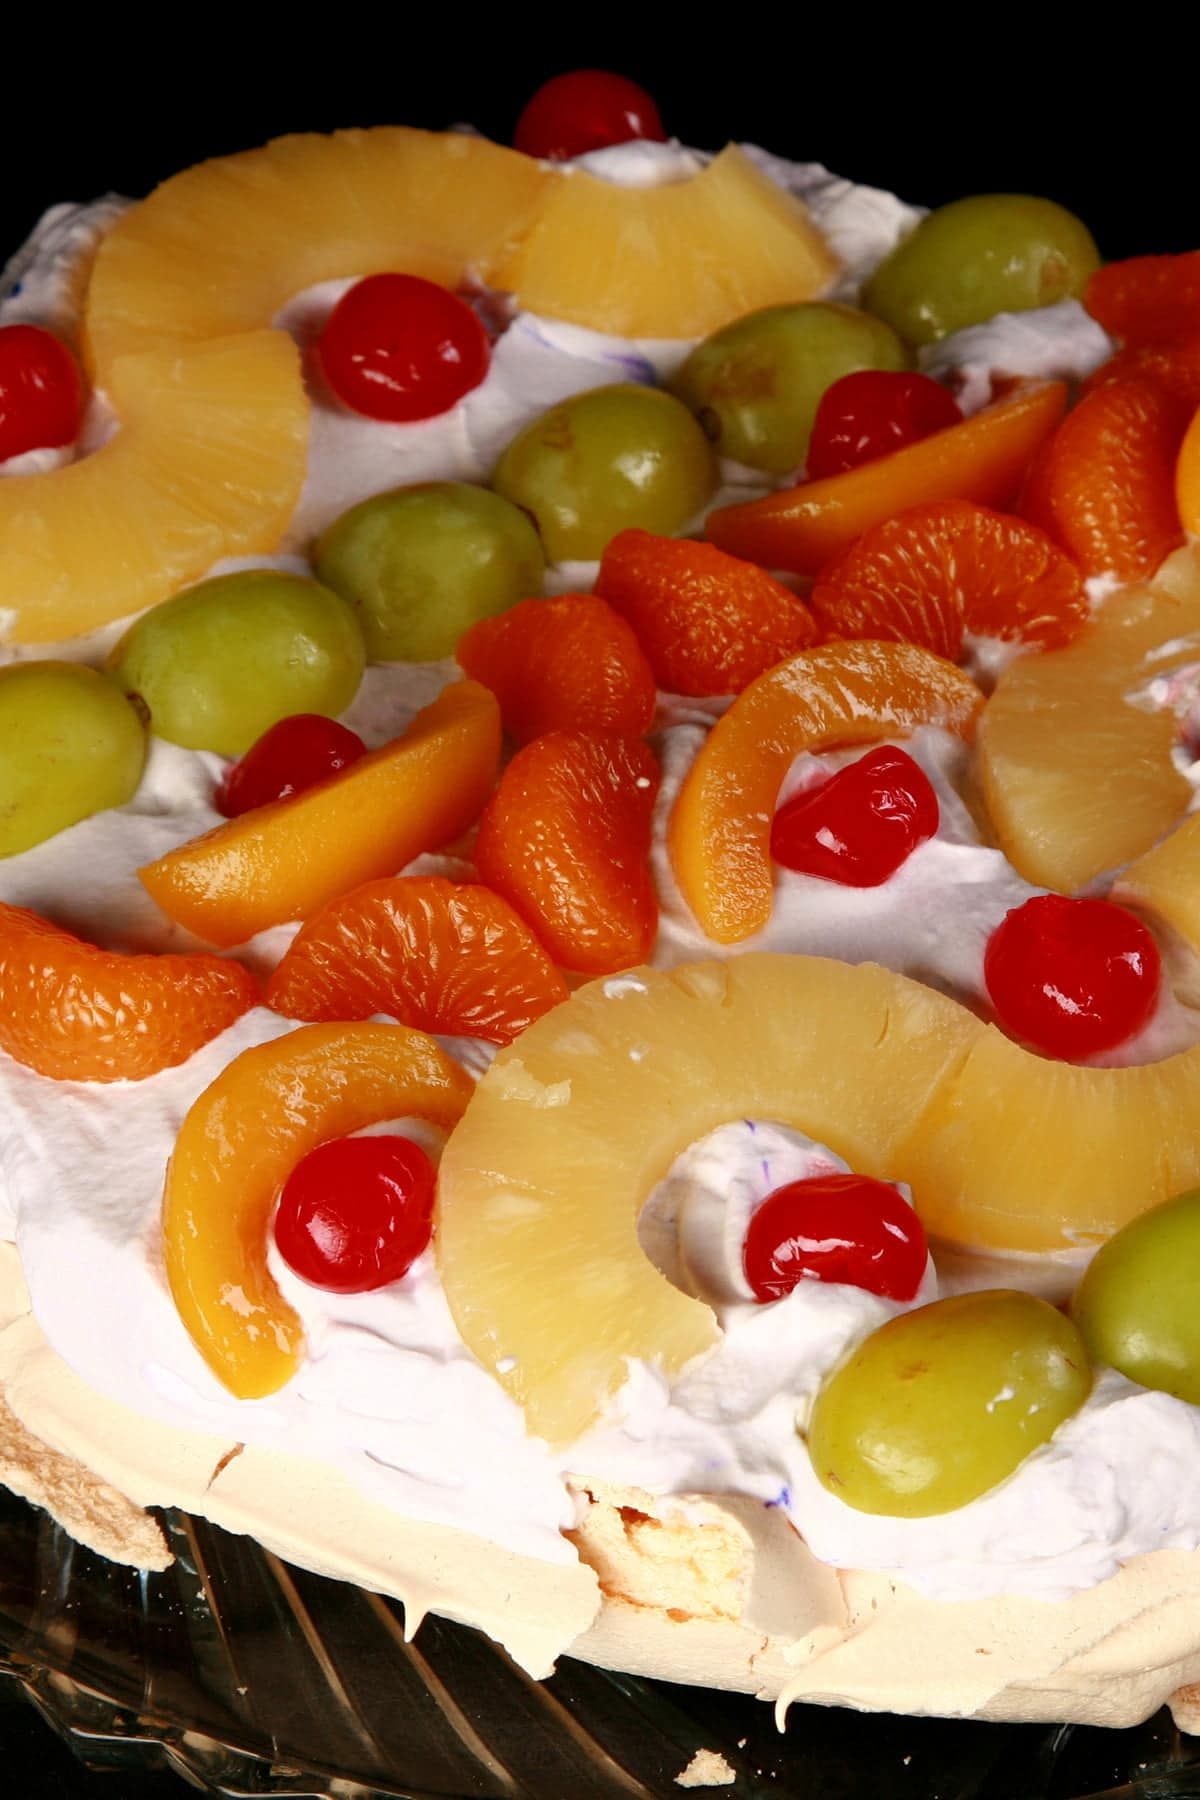 A close up view of an Easter Egg themed pavlova.